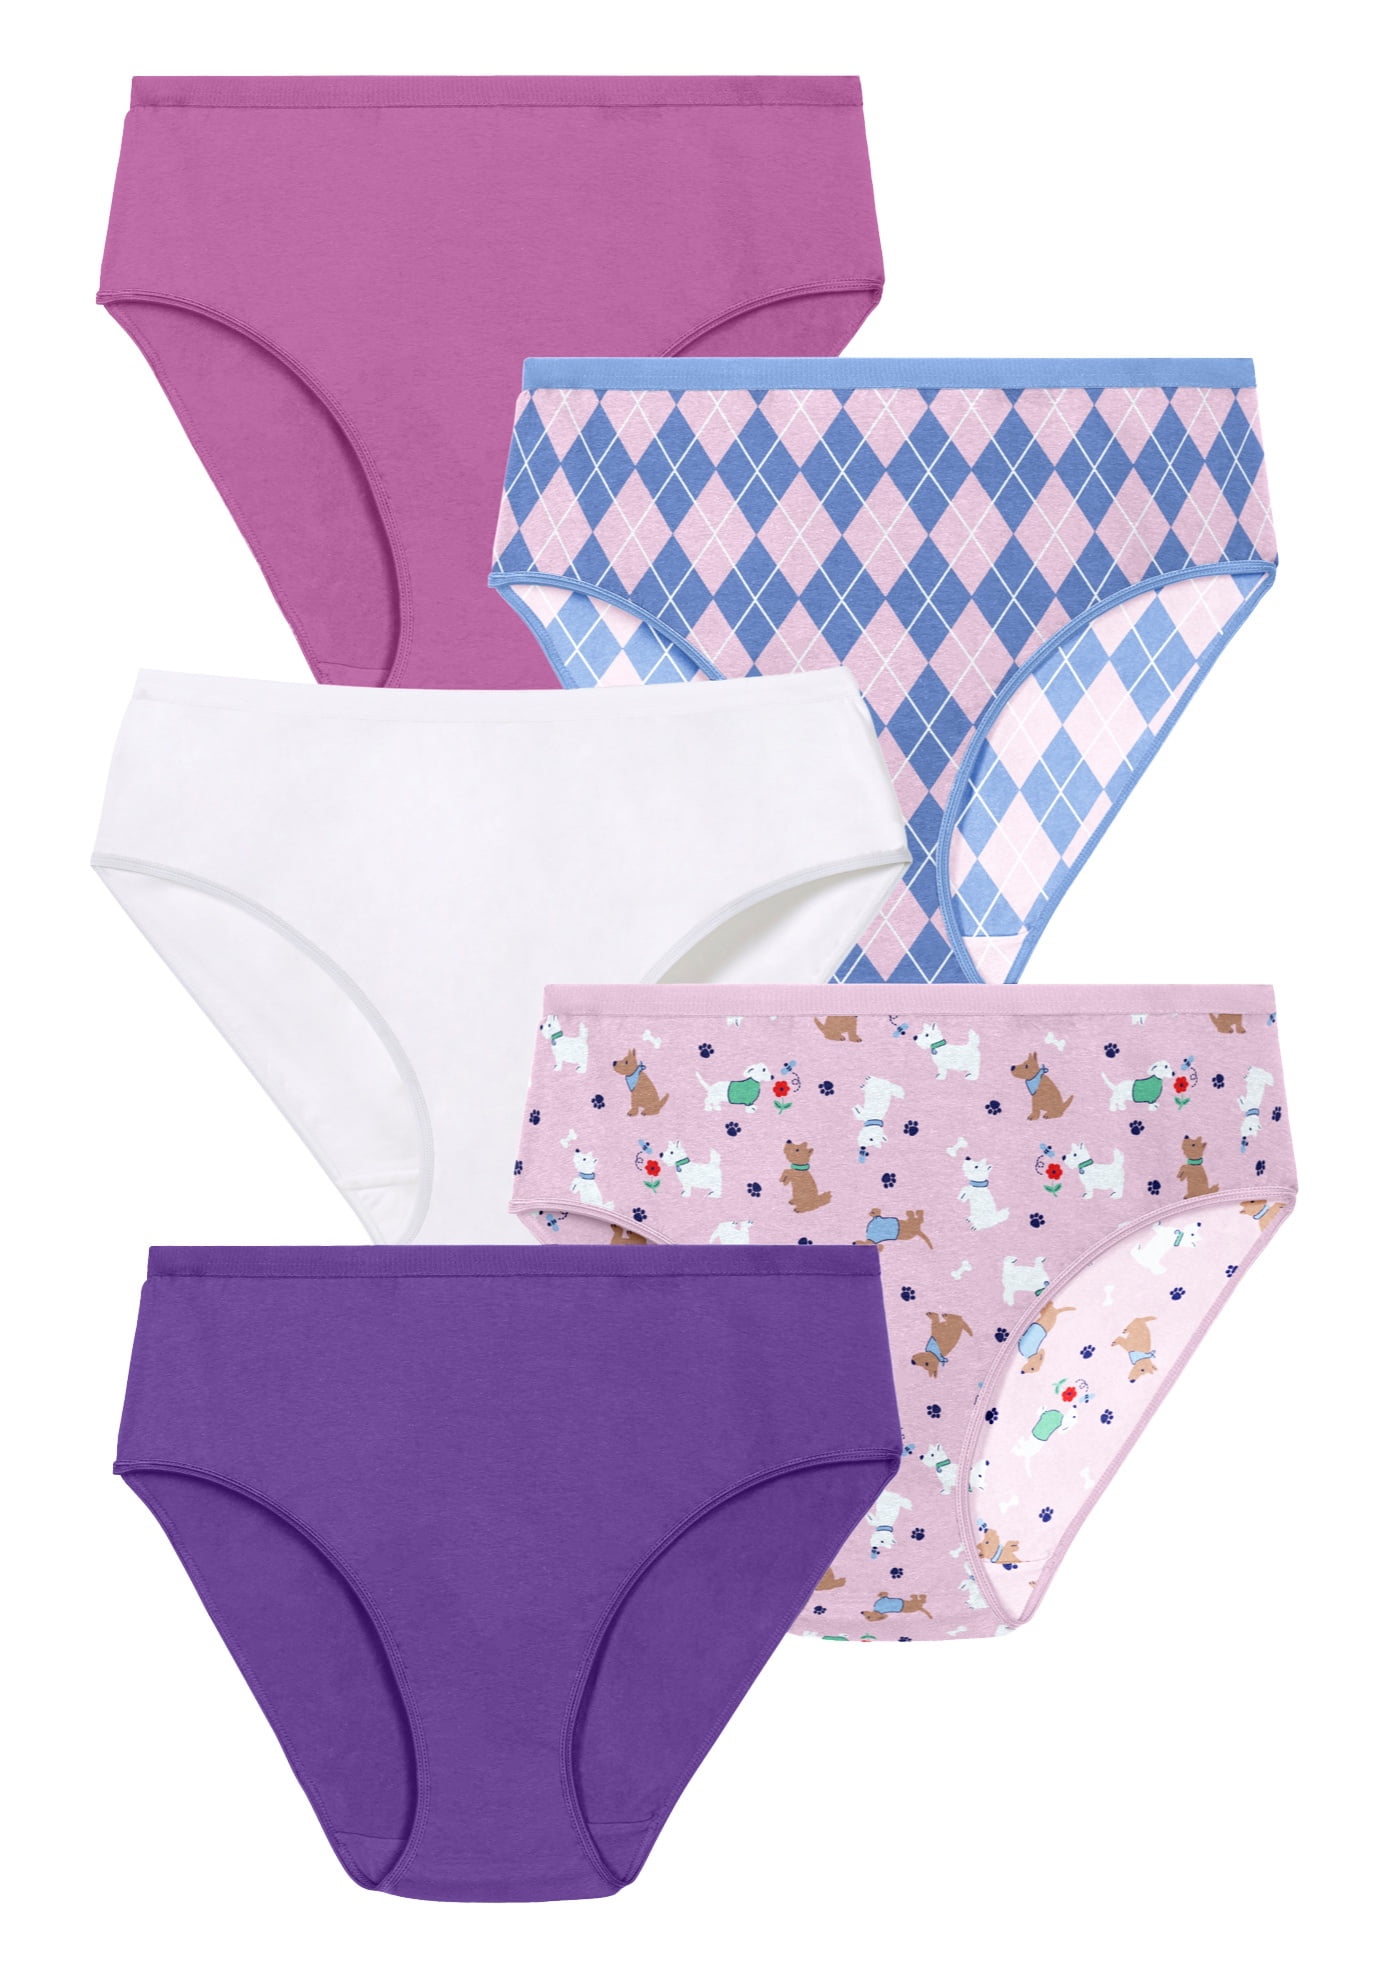 Comfort Choice Women's Plus Size Hi-Cut Cotton Brief 5-Pack - 7, Basic Pack  Multicolored at  Women's Clothing store